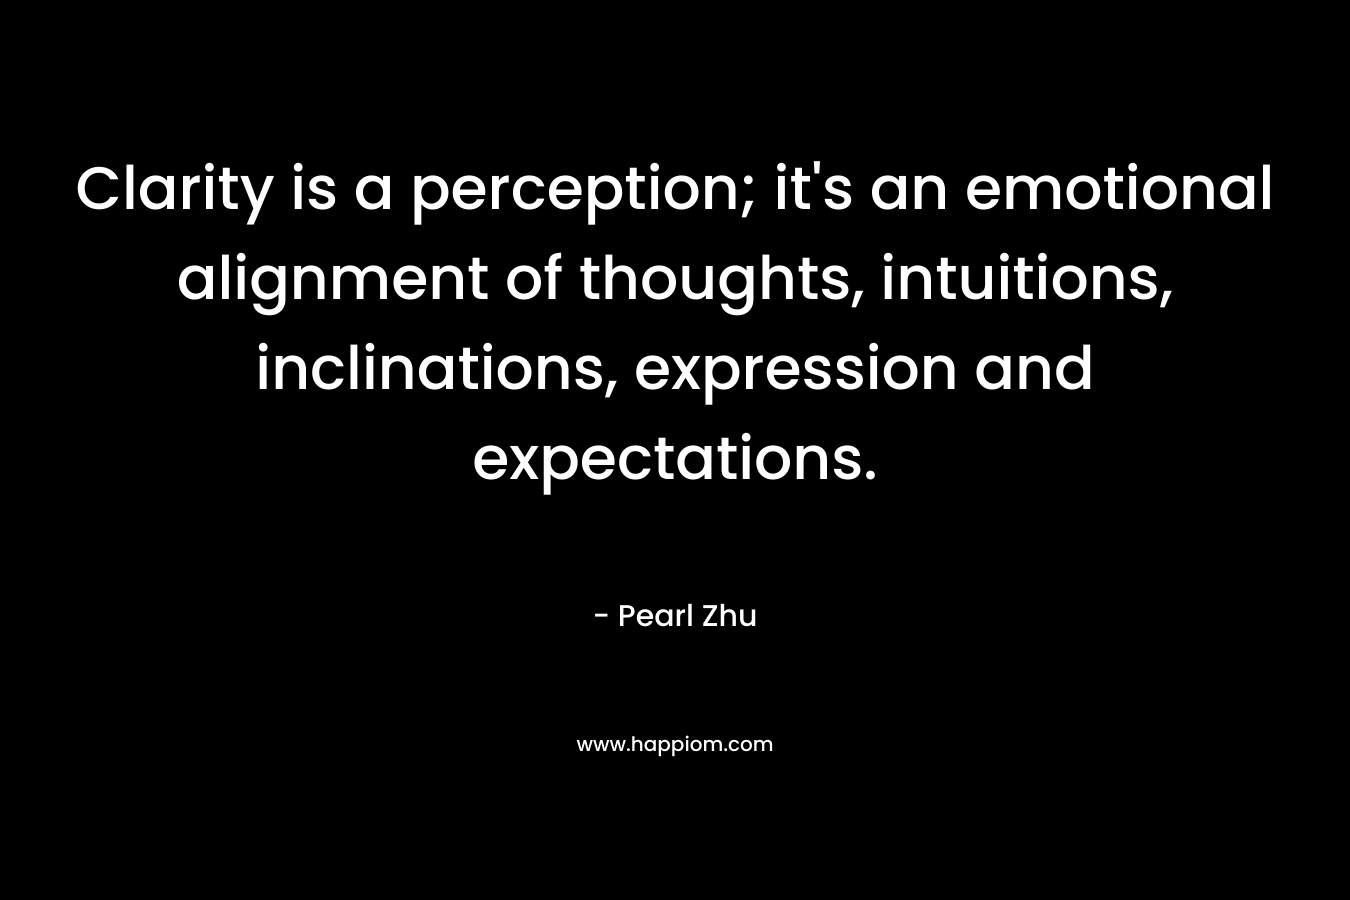 Clarity is a perception; it’s an emotional alignment of thoughts, intuitions, inclinations, expression and expectations. – Pearl Zhu